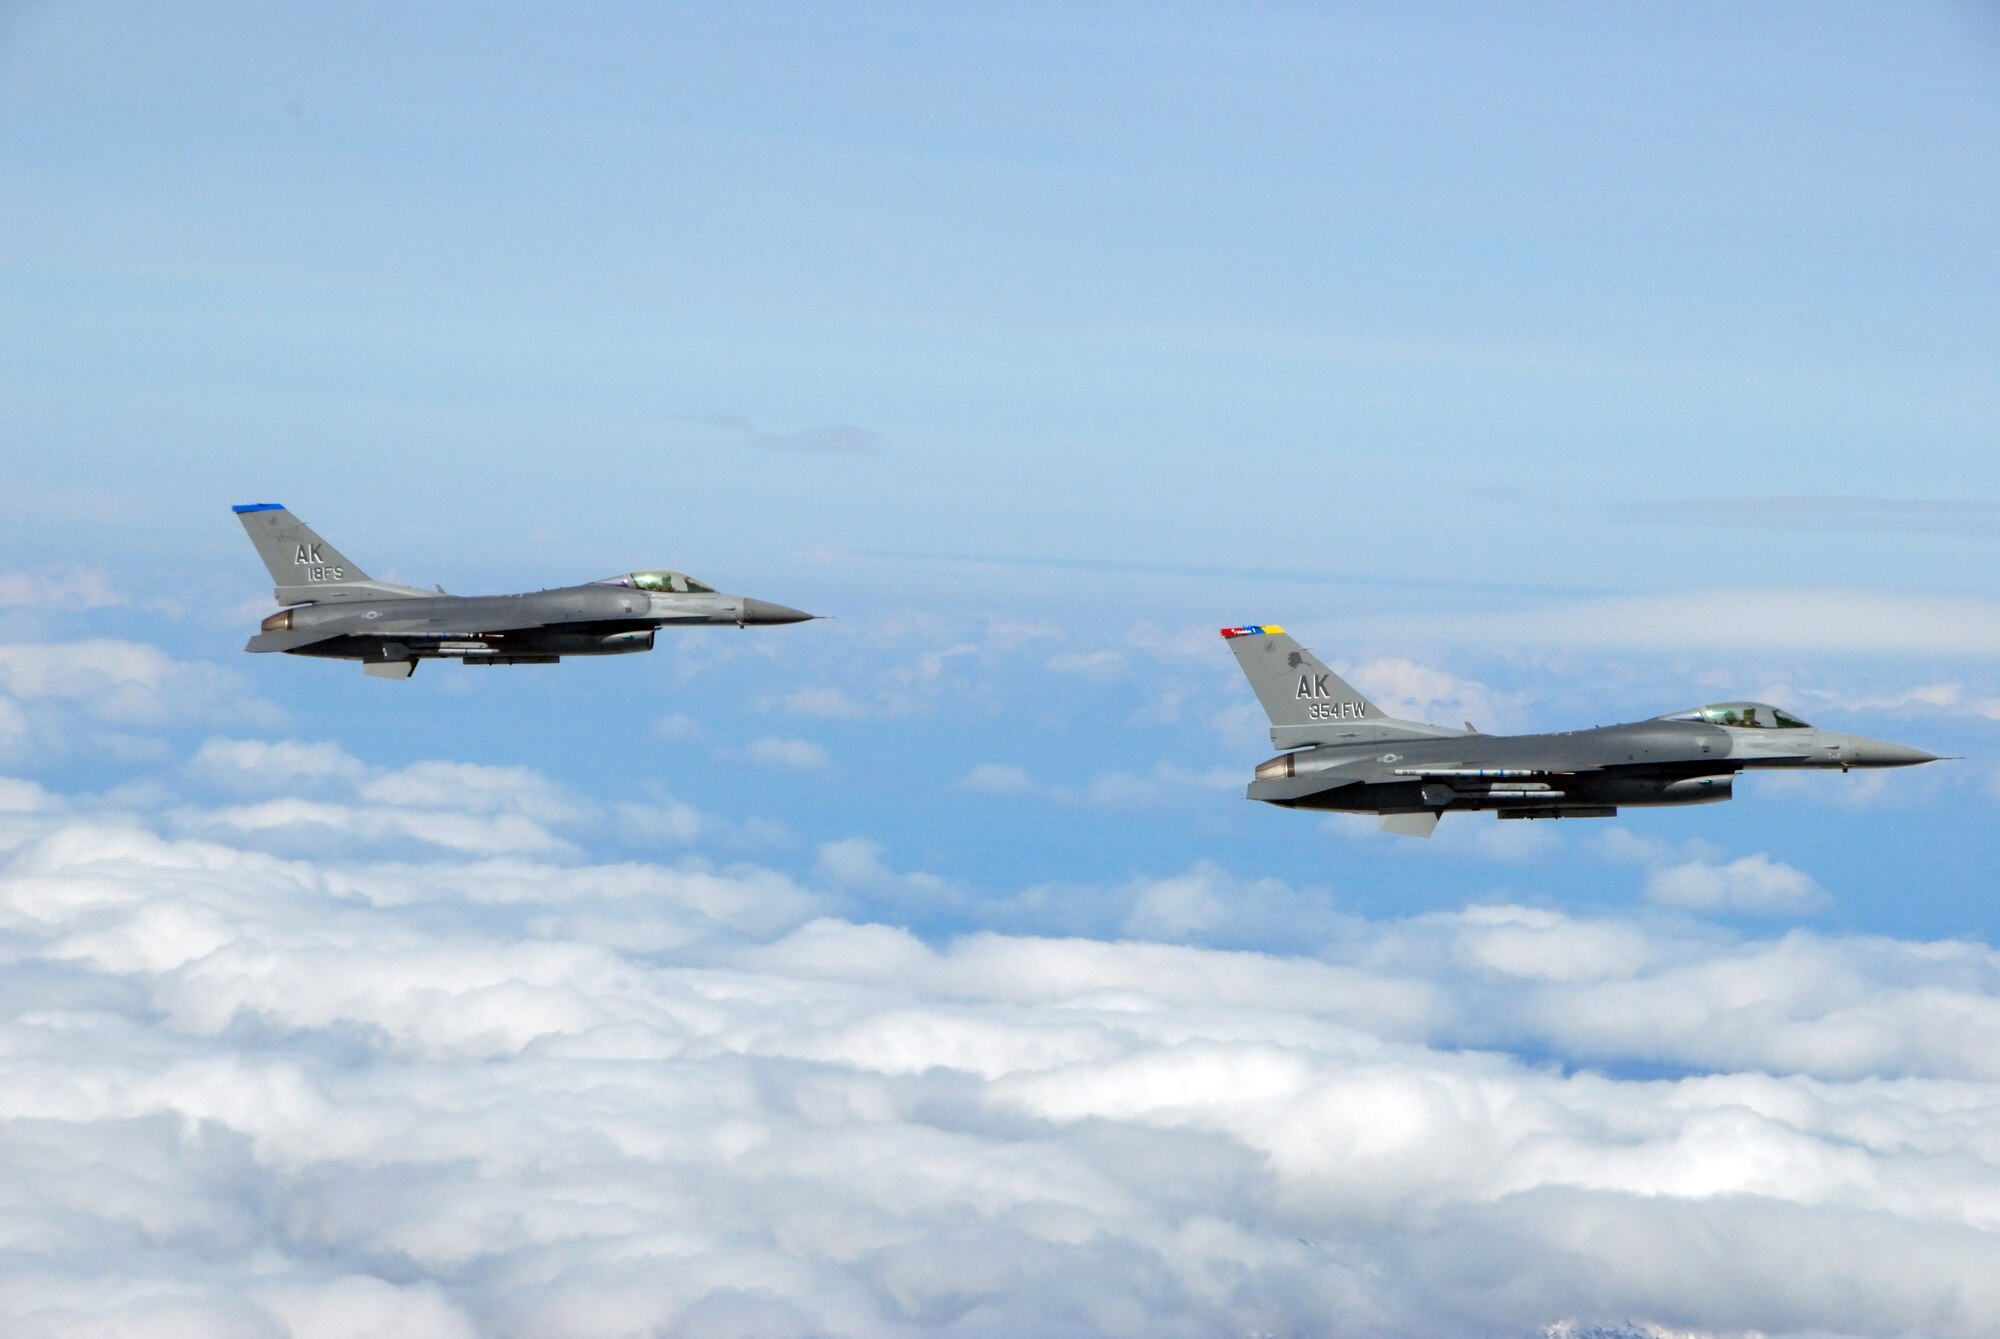 EIELSON AIR FORCE BASE, Alaska -- Two F-16 Fighting Falcons from the 18th Fighter Squadron, Alaska Air National Guard, fly over the Pacific Alaska Range Complex on May 29, 2007.  The two aircraft assigned to Eielson flew in formation for the last time due to the deactivation of the 355th FS, and the 18th FS.  (U.S. Air Force photo by Master Sergeant Rob Wieland) 